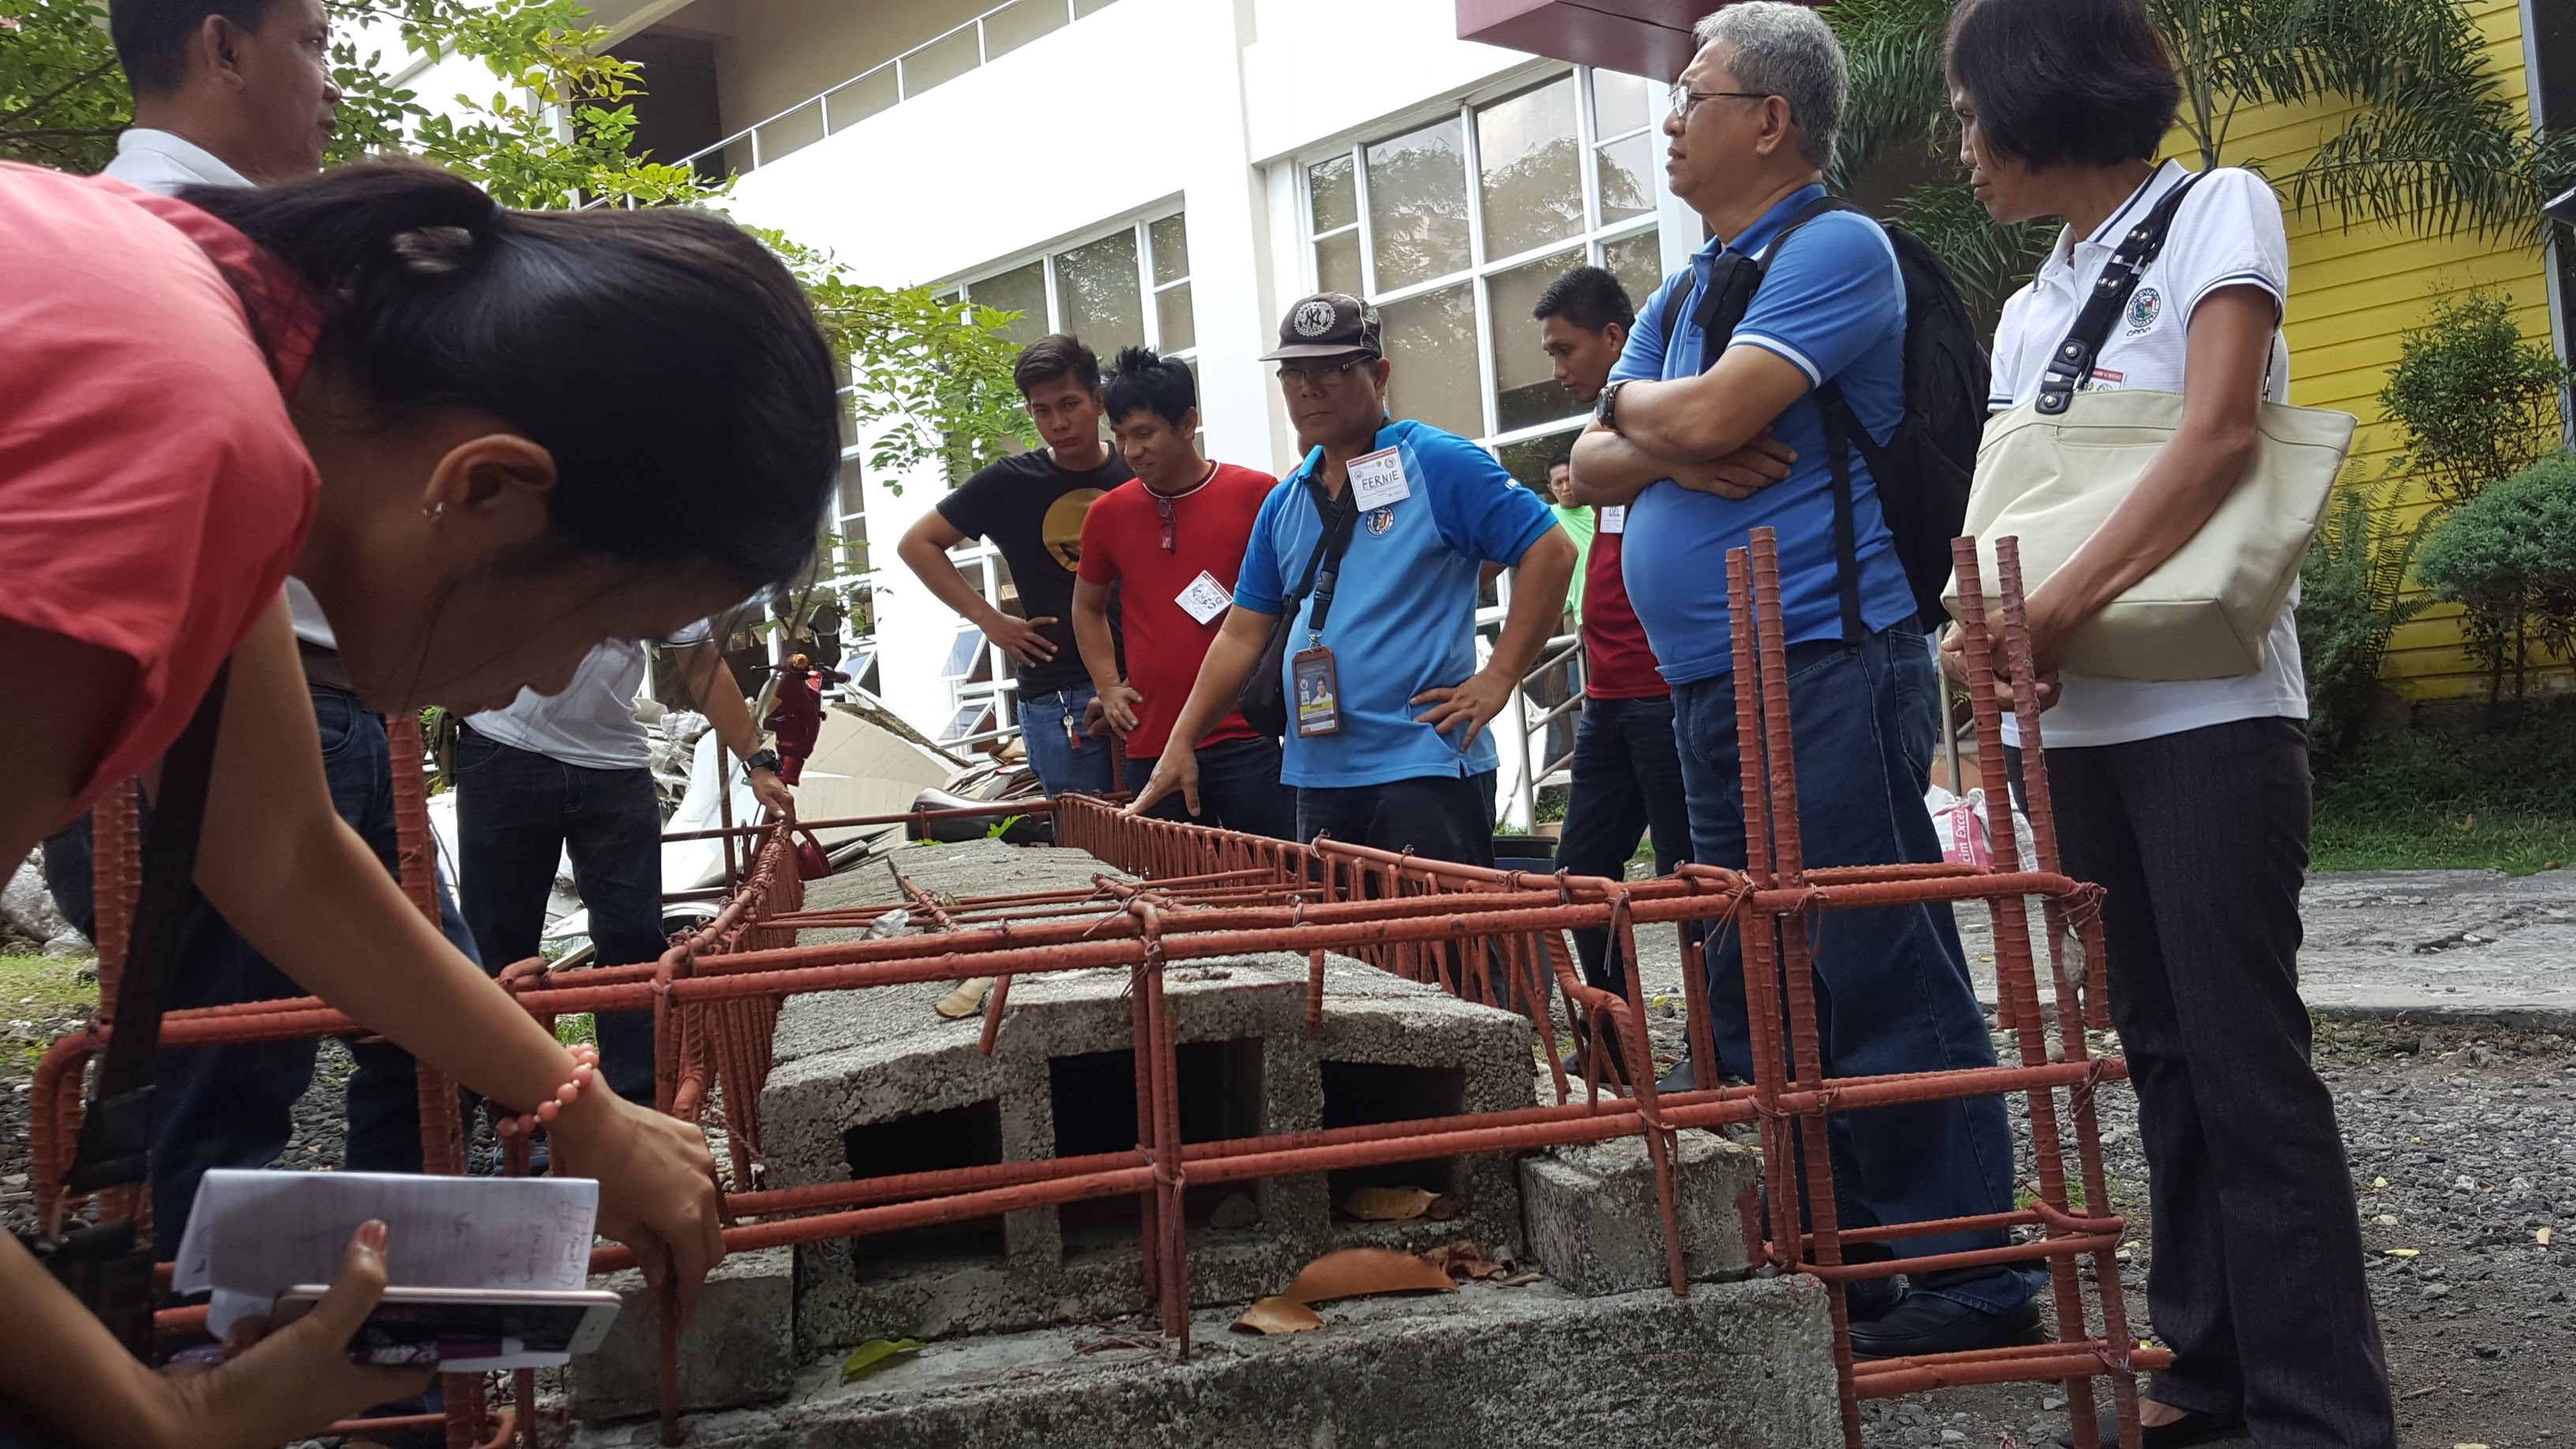 The participants also had the opportunity to observe and test the strength of the assembled beam of slab blocks.